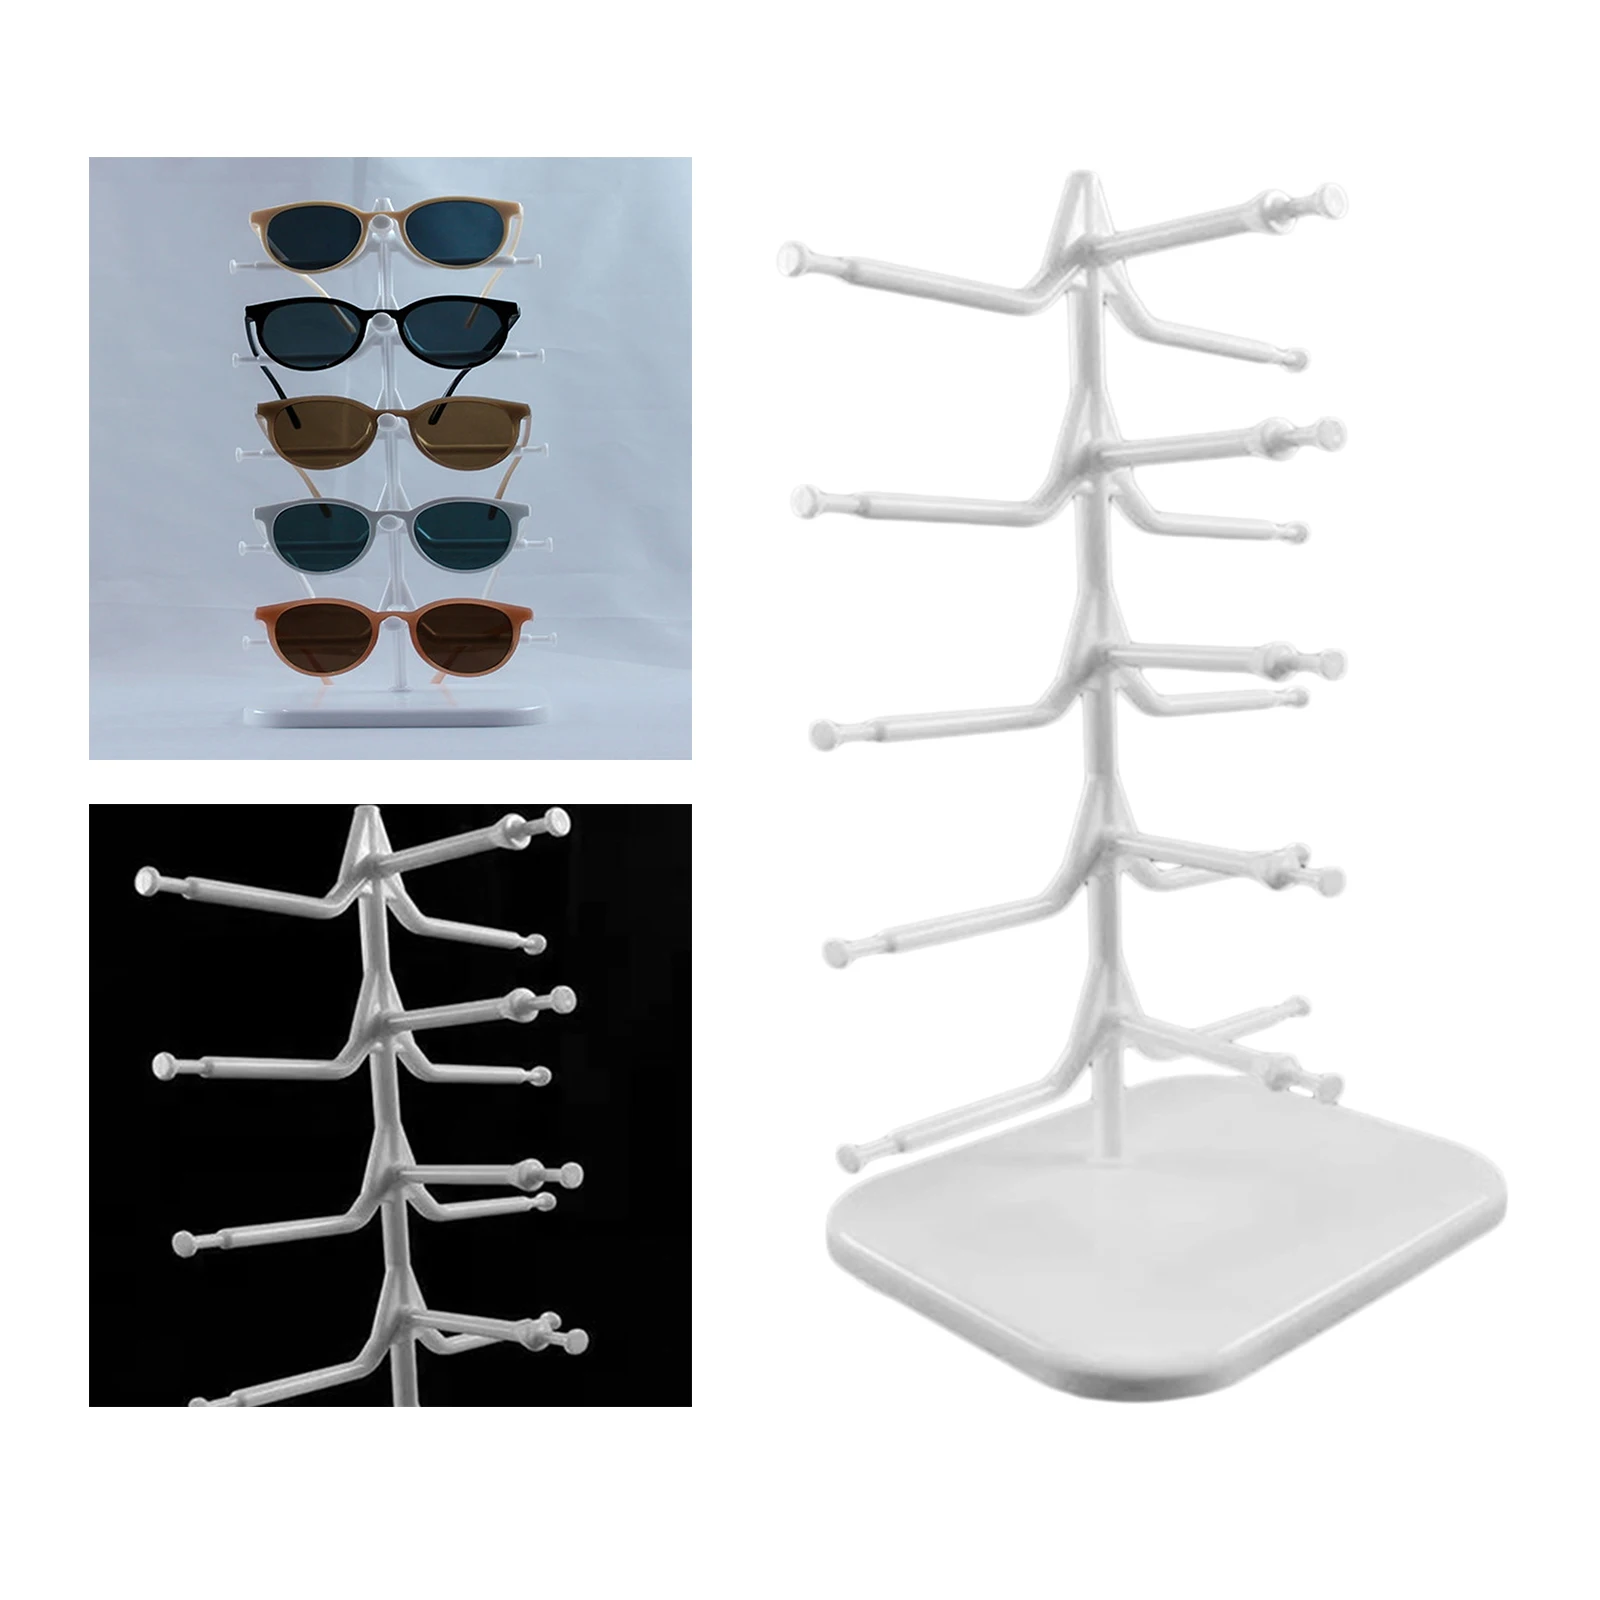 Sunglasses Eyeglasses Display Stands Shelf Glasses Display Show Stand Holder Rack for 5 Pairs Glasses